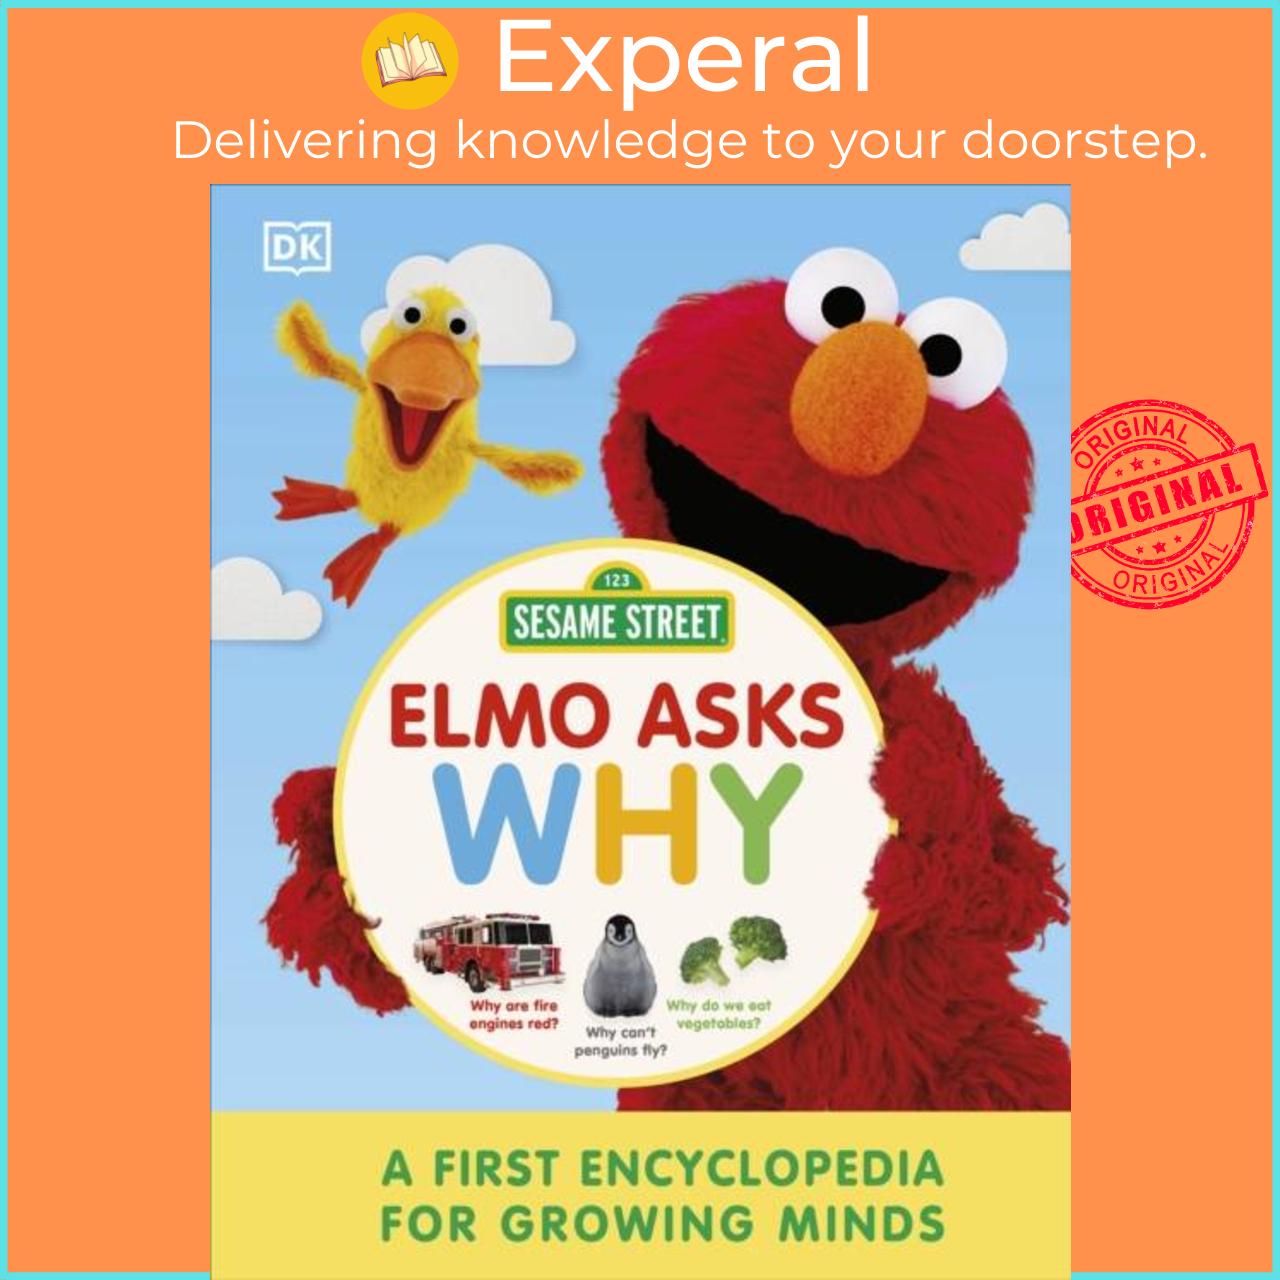 Sách - Sesame Street Elmo Asks Why? - A First Encyclopedia for Growing Minds by DK (UK edition, hardcover)